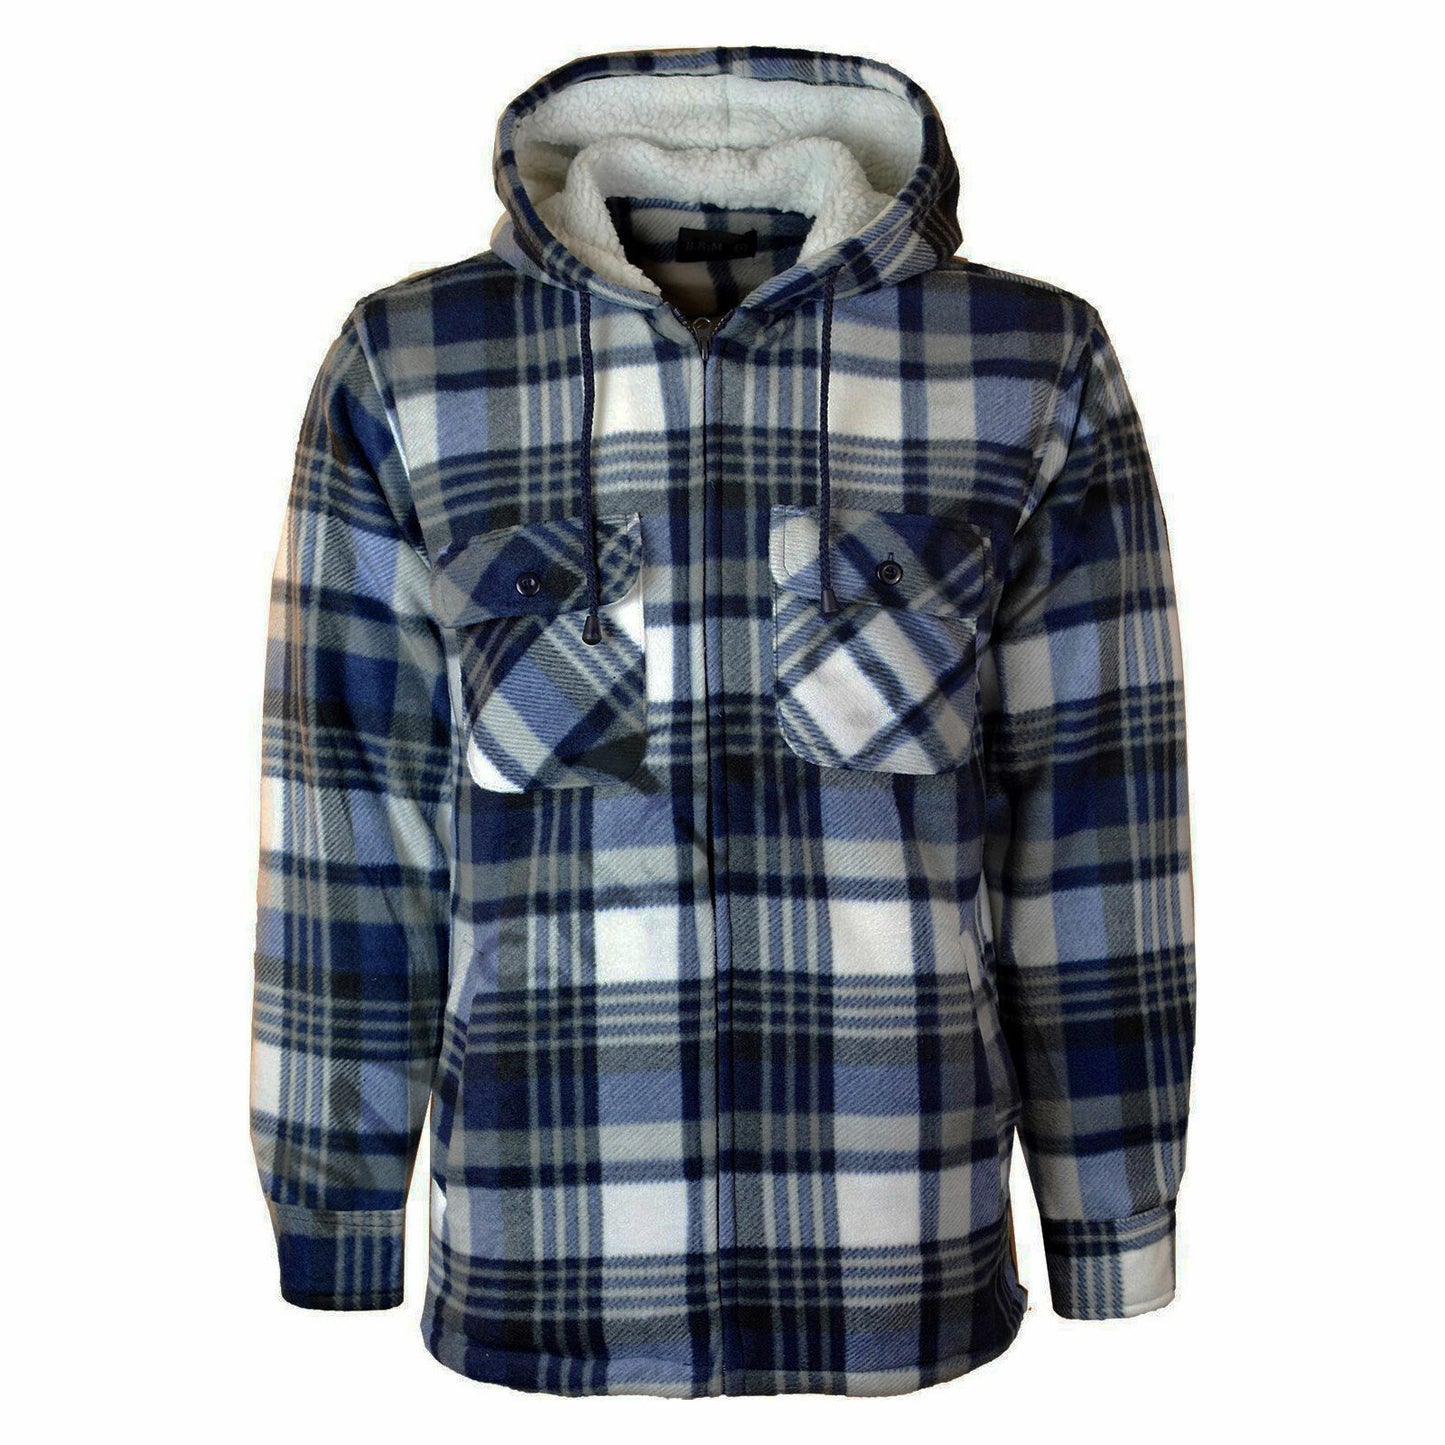 MENS PADDED SHIRT FUR LINED LUMBERJACK FLANNEL WORK JACKET WARM THICK CASUAL TOP